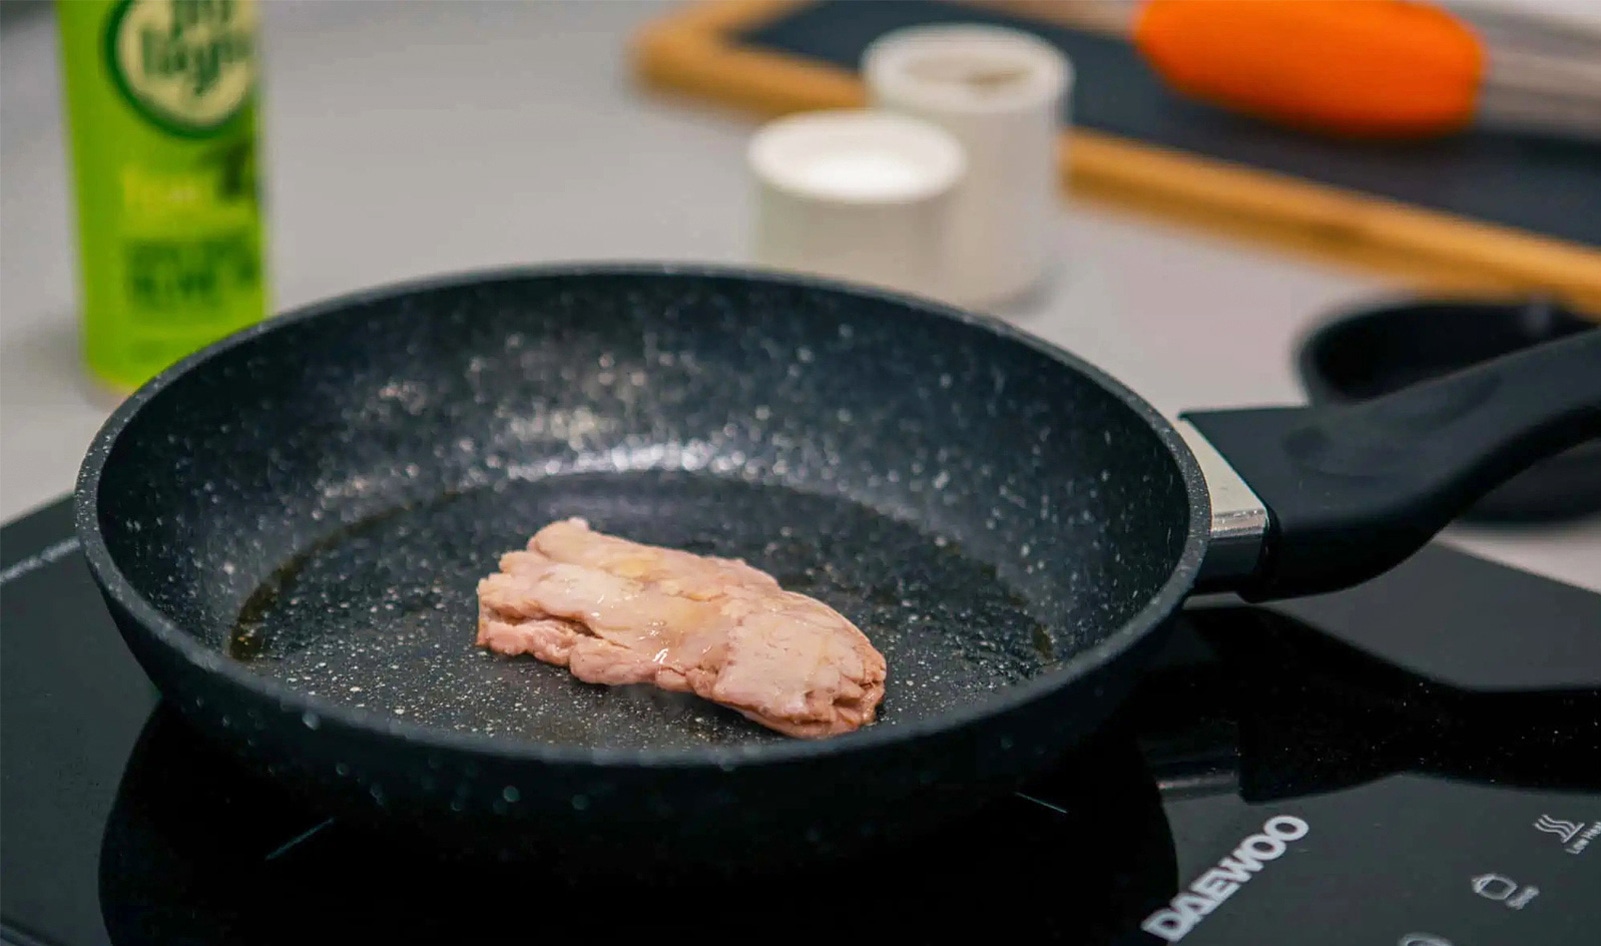 UK Startup Improves ‘The Other White Meat’ With Cultivated Pork Filet